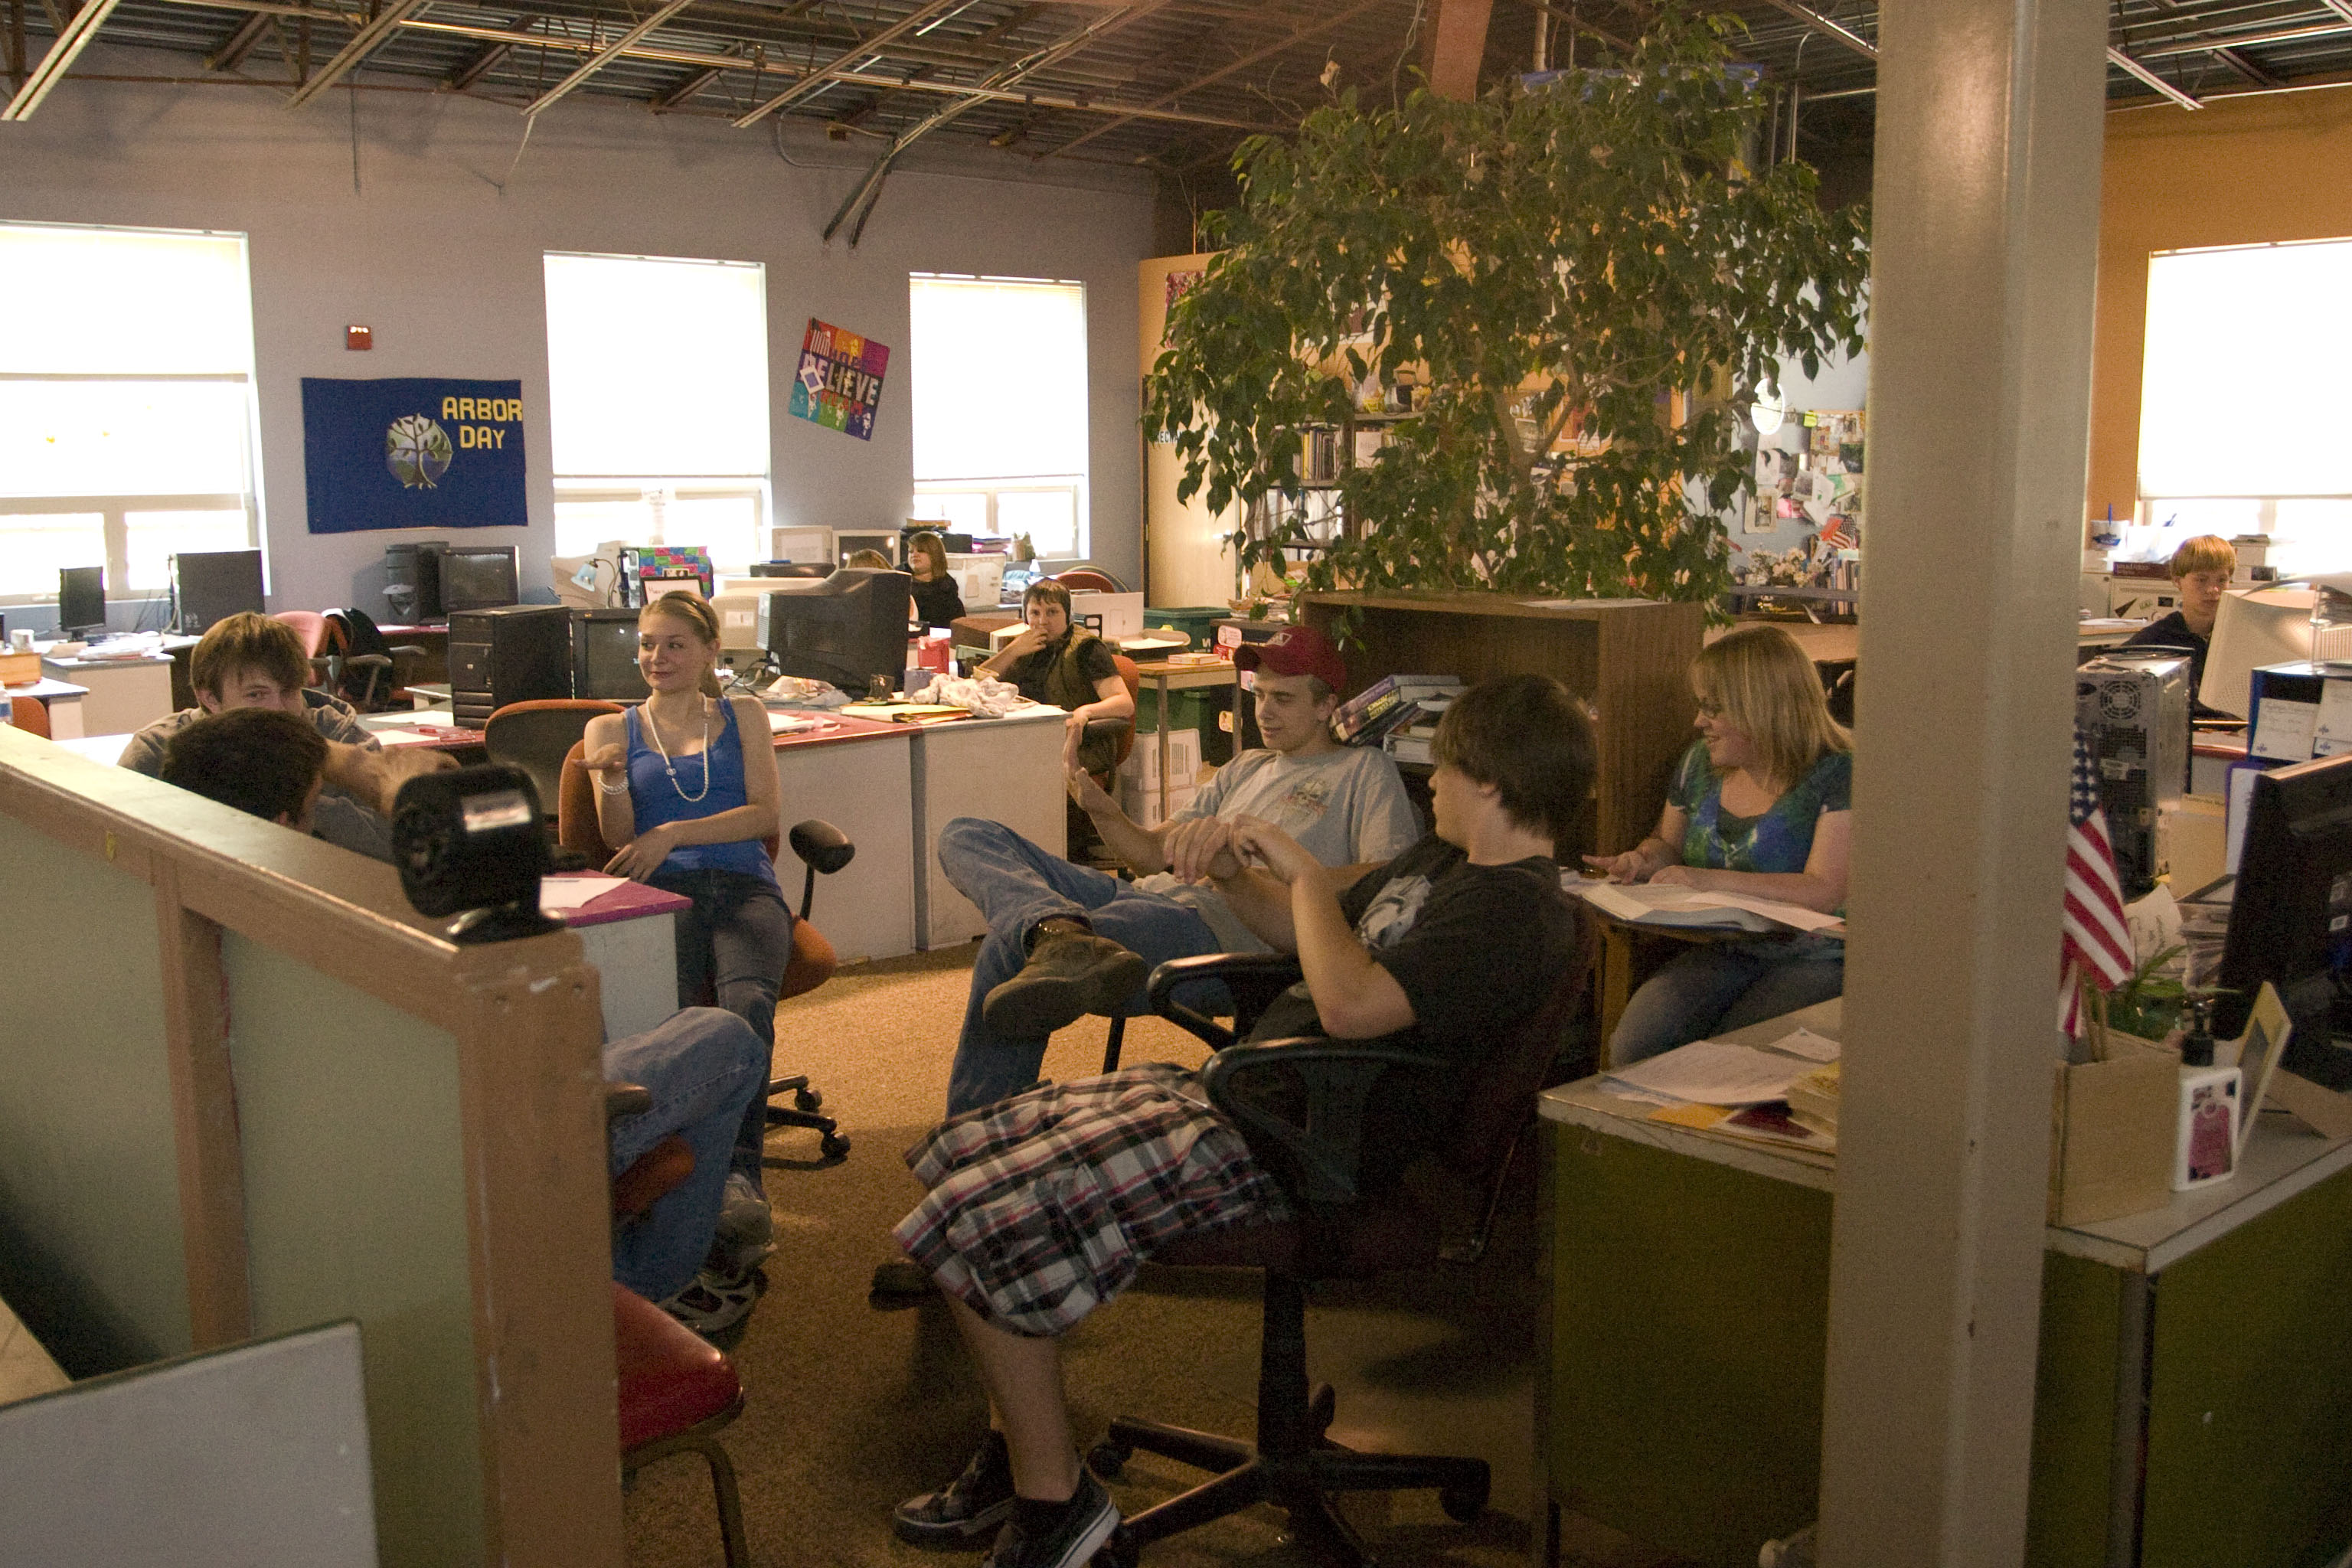 At the Minnesota New Country School, students of all ages sit together in one room. All the students have their own desks and personal computers.